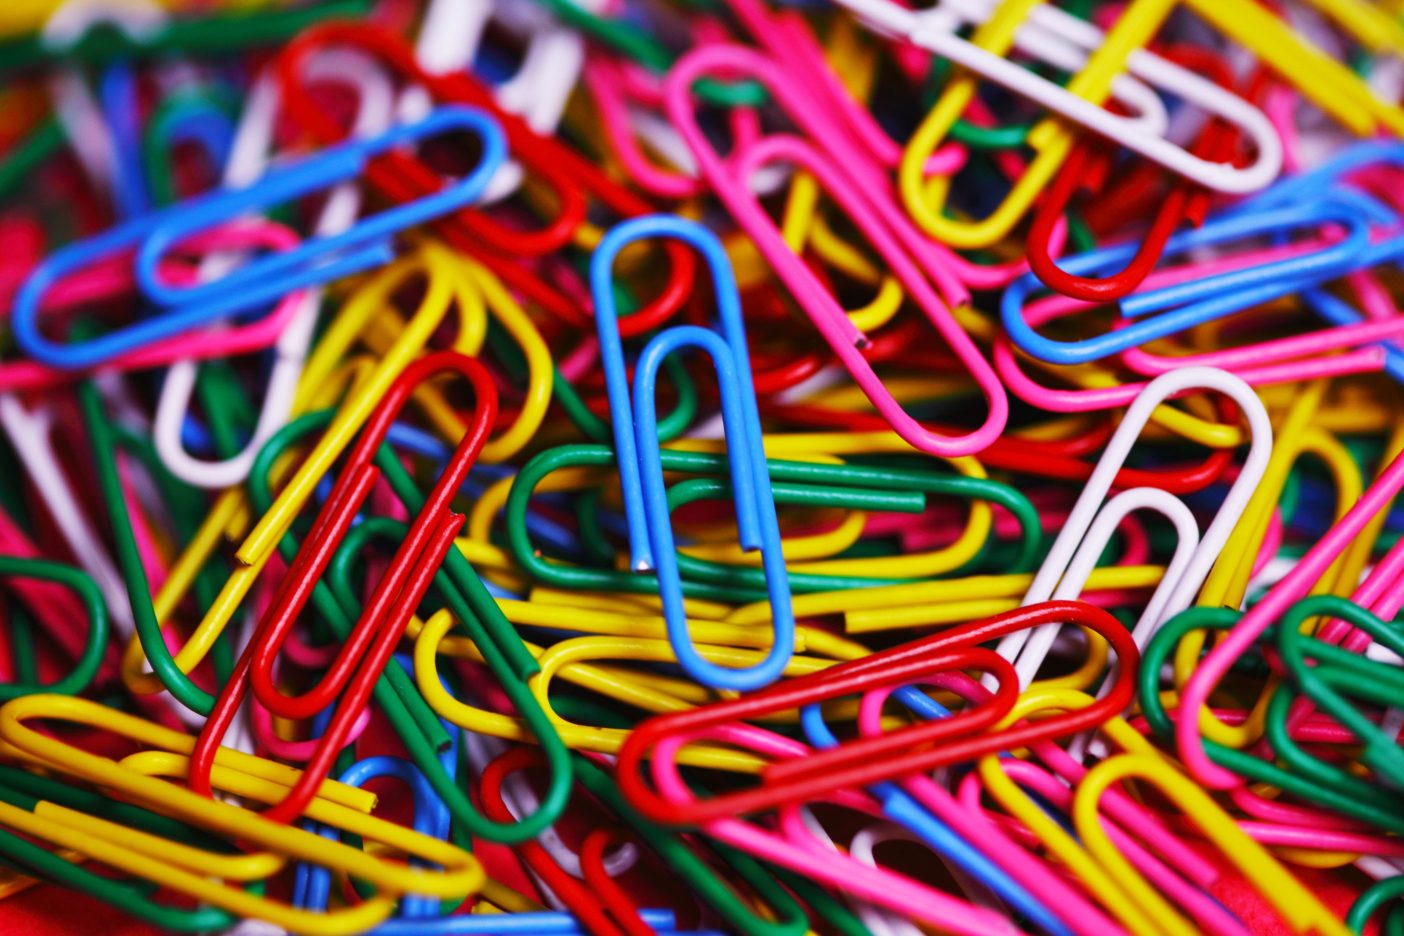 A pile of colorful paper clips.